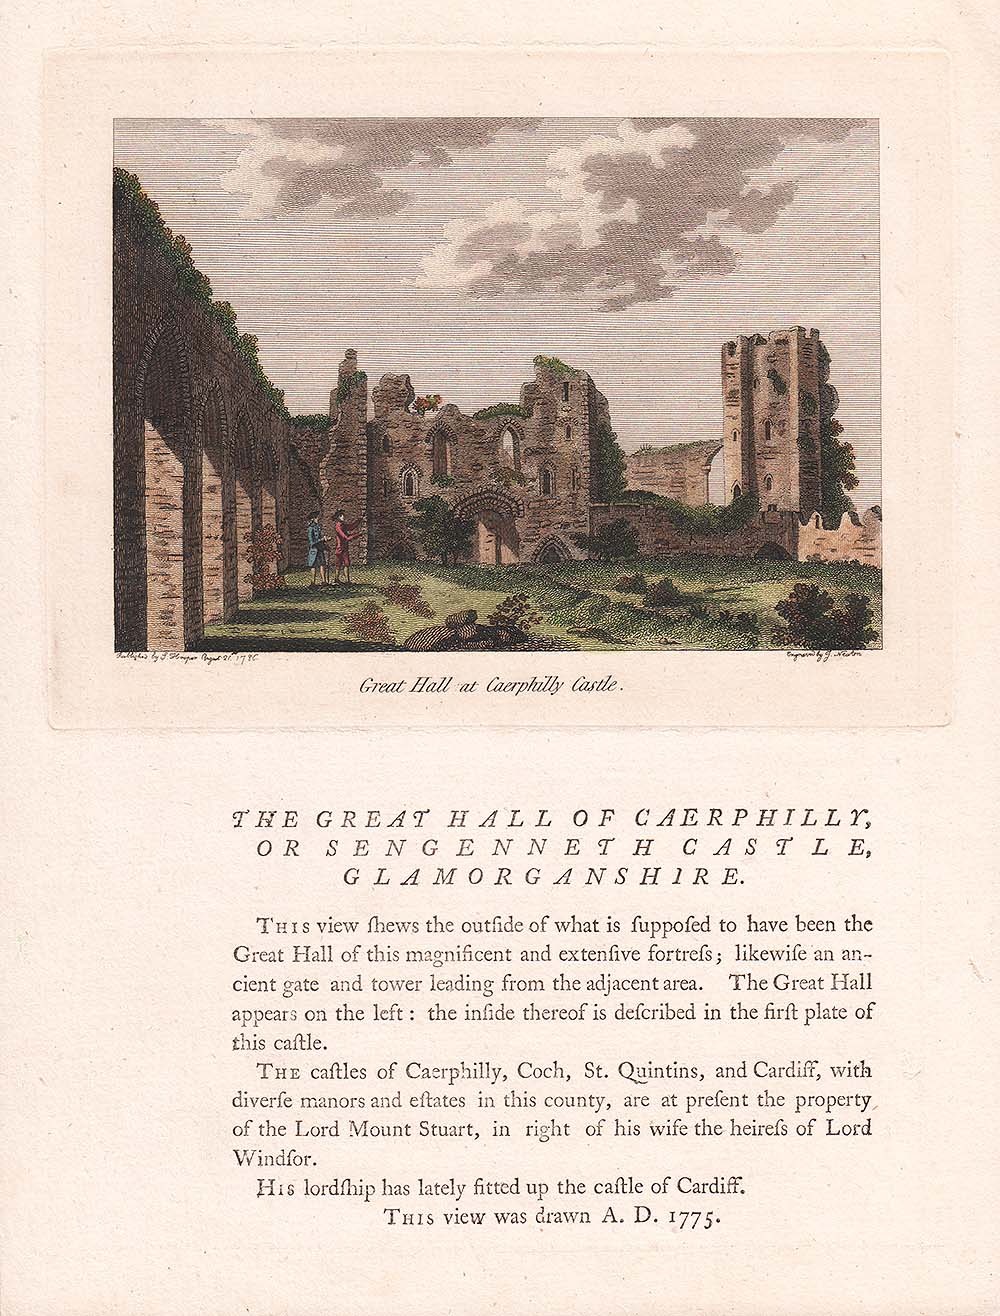 The Great Hall of Caerphilly or Sengenneth Castle Glamorganshire